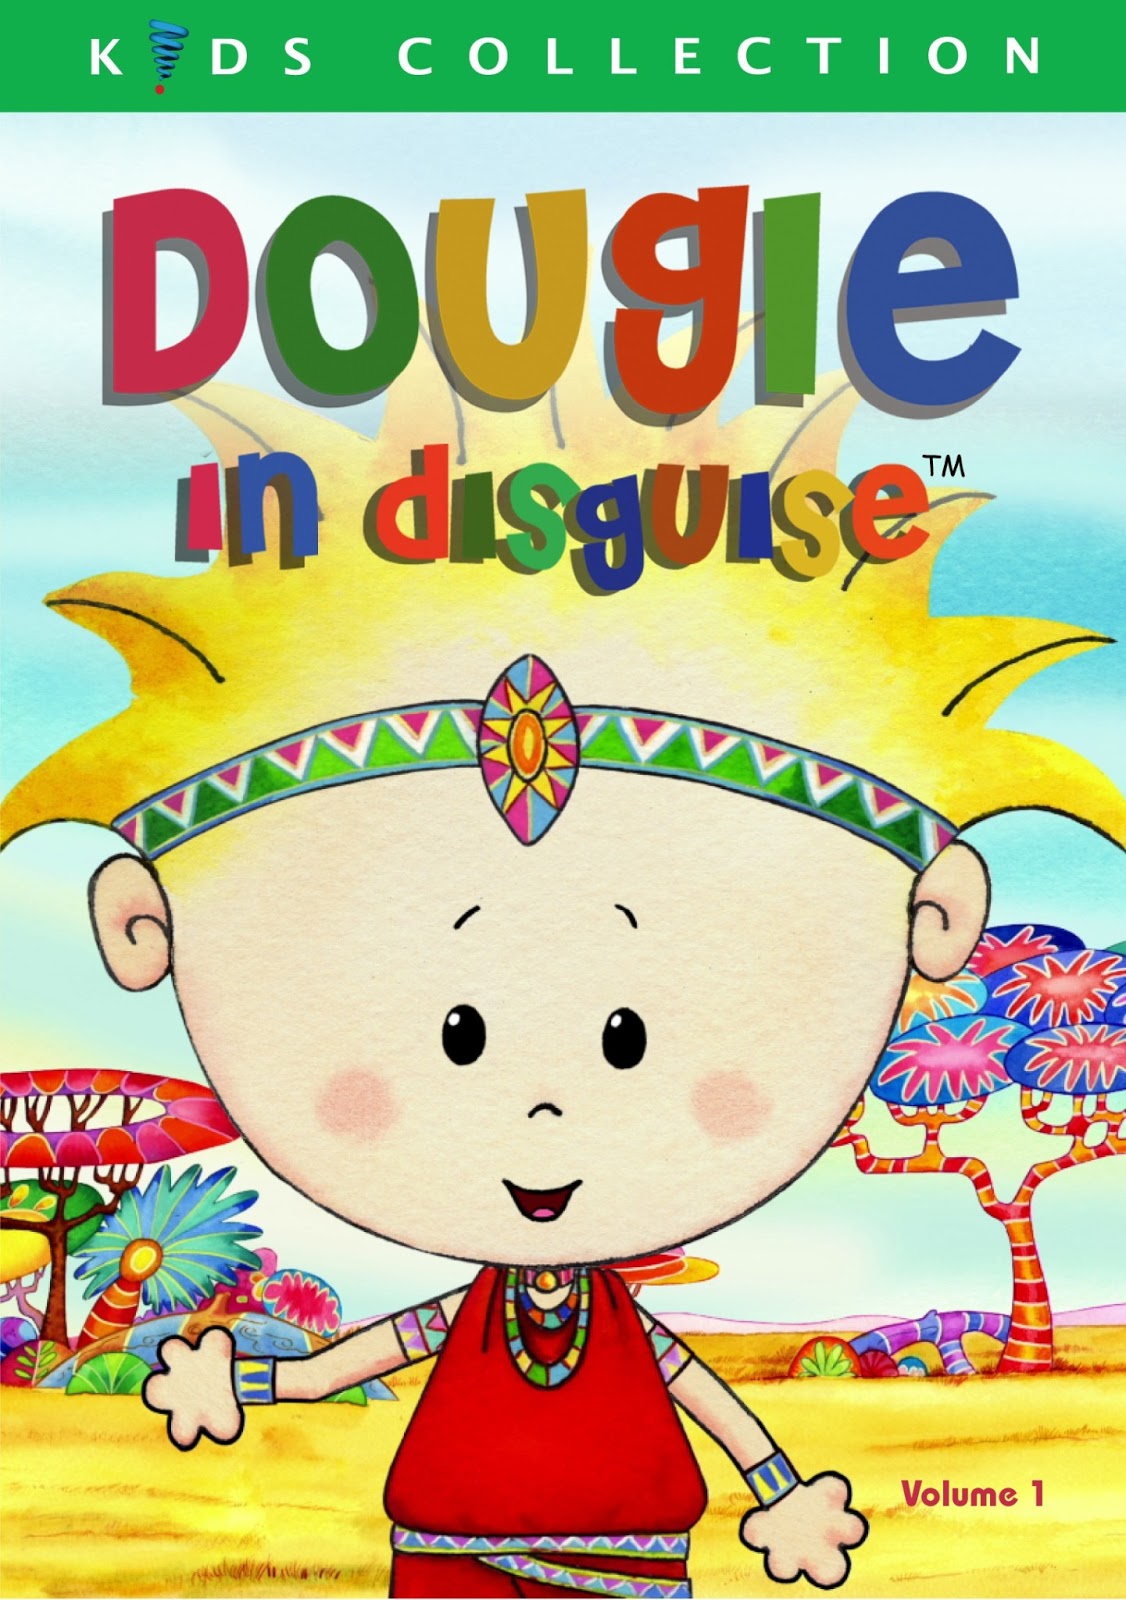 Dougie In Disguise Volume 1 {Review} from @OrganaKids